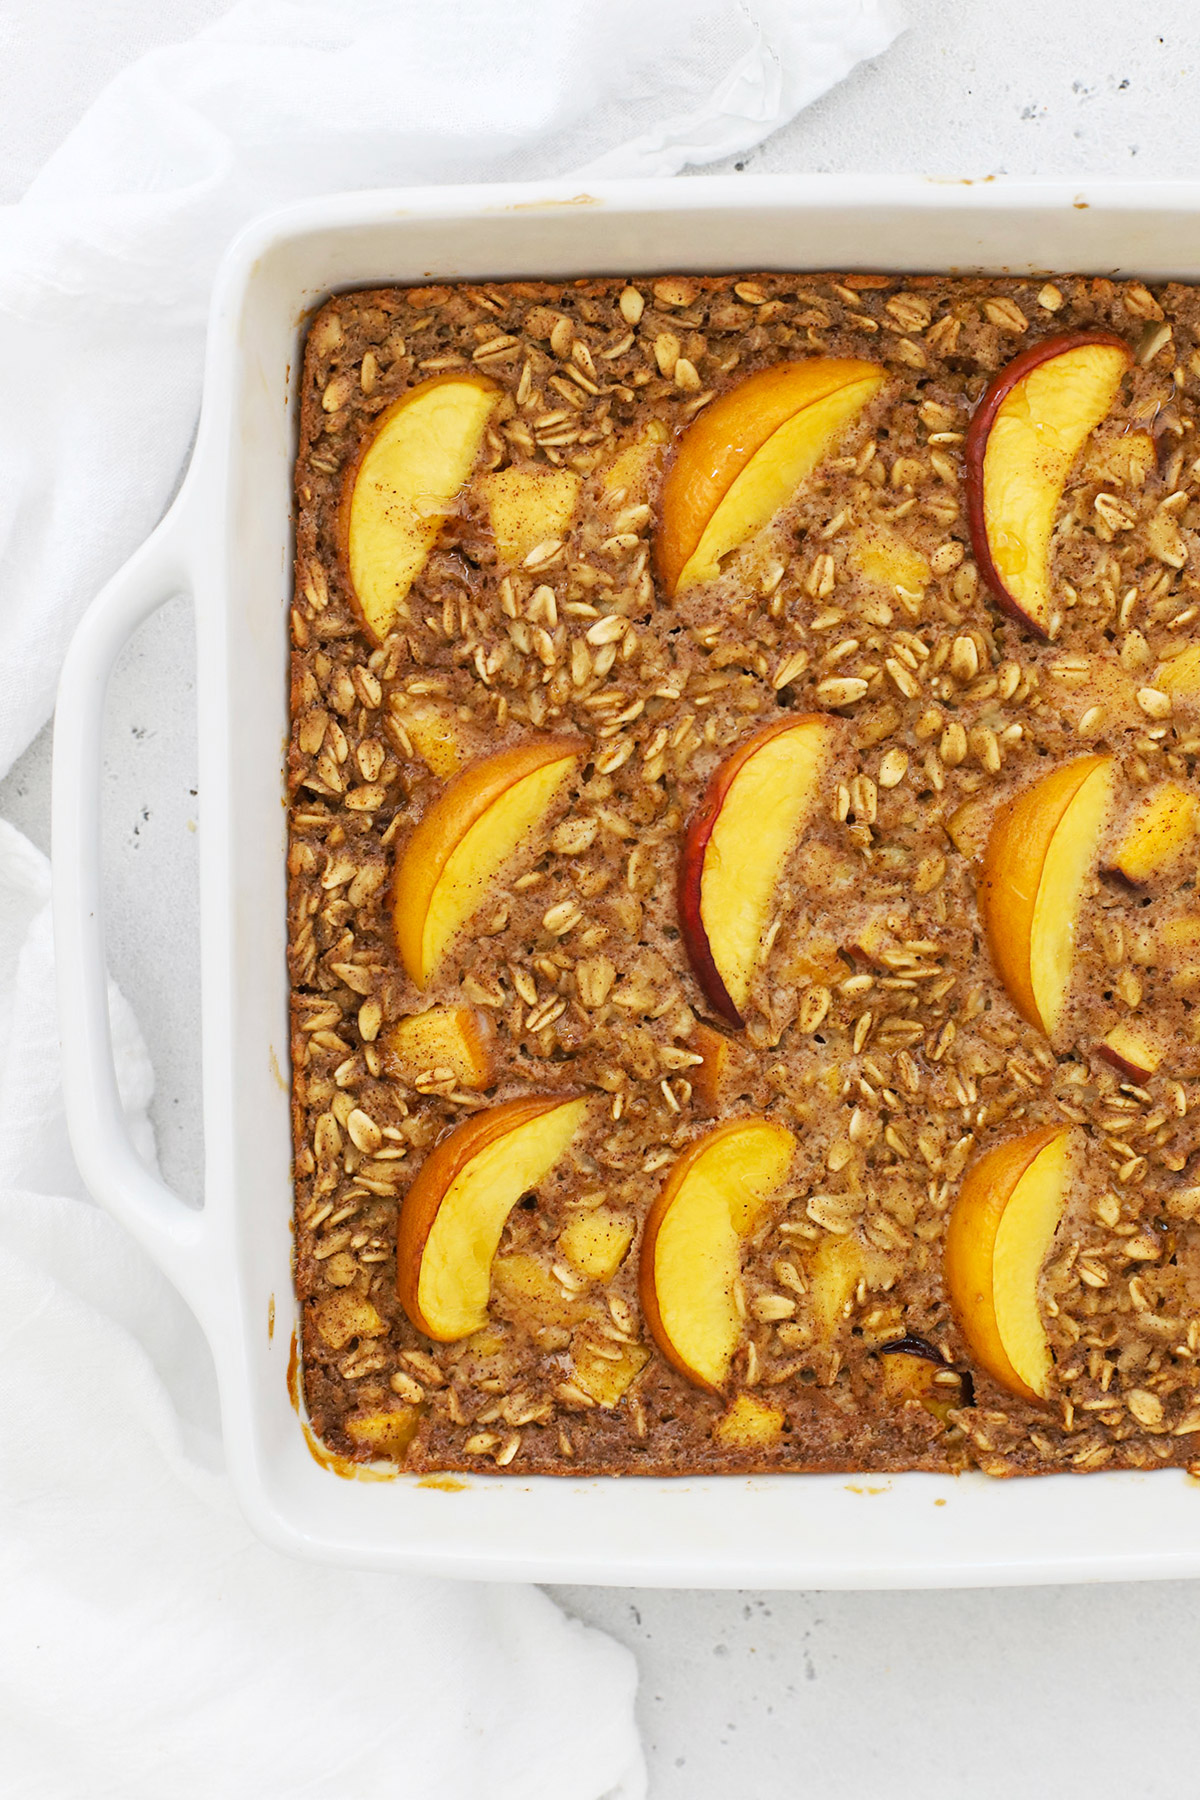 Overhead view of a pan of gluten-free peach baked oatmeal